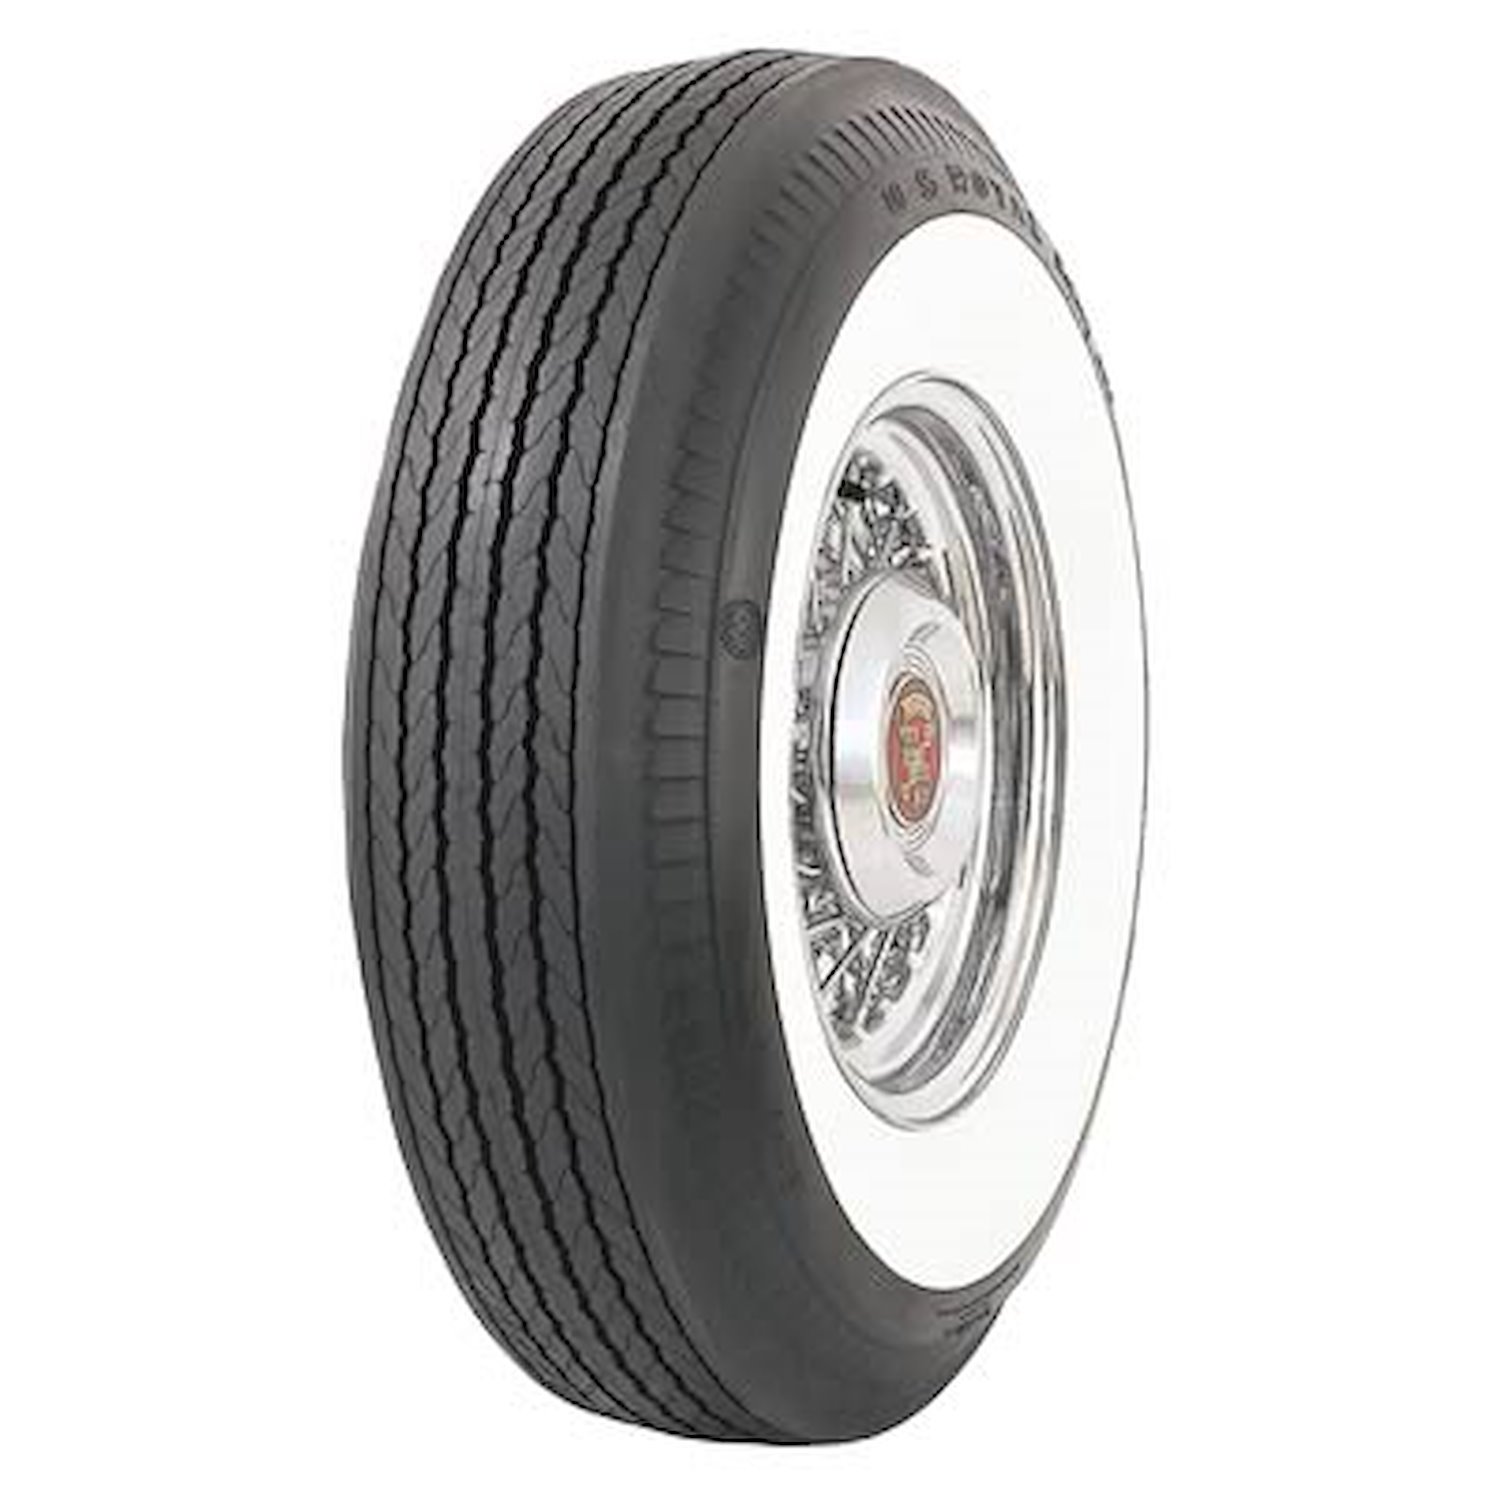 619905 Tire, US Royal 2.25-Inch Whitewall, 820-15